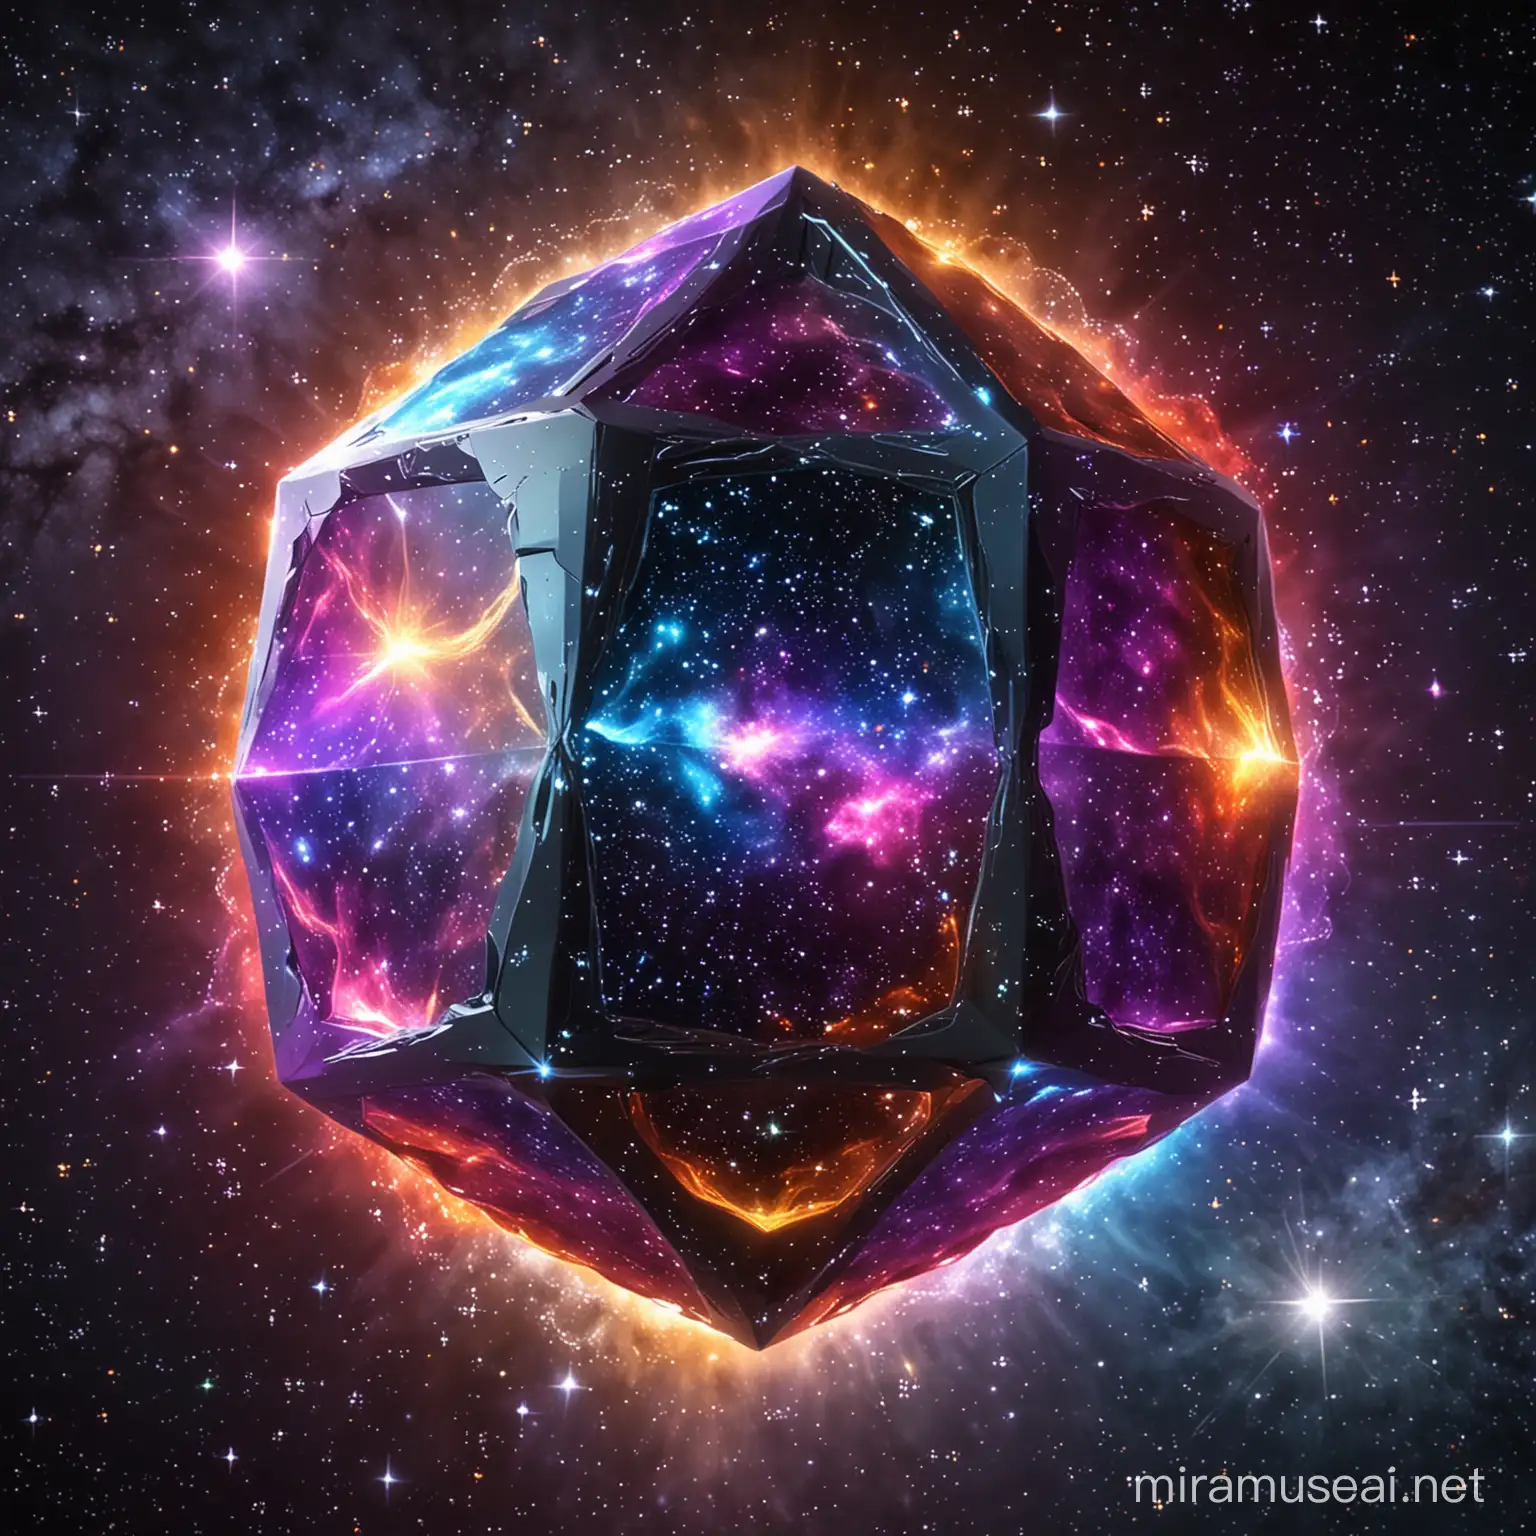 Cosmic Dodecahedron in 3D Space with Rotating Universe